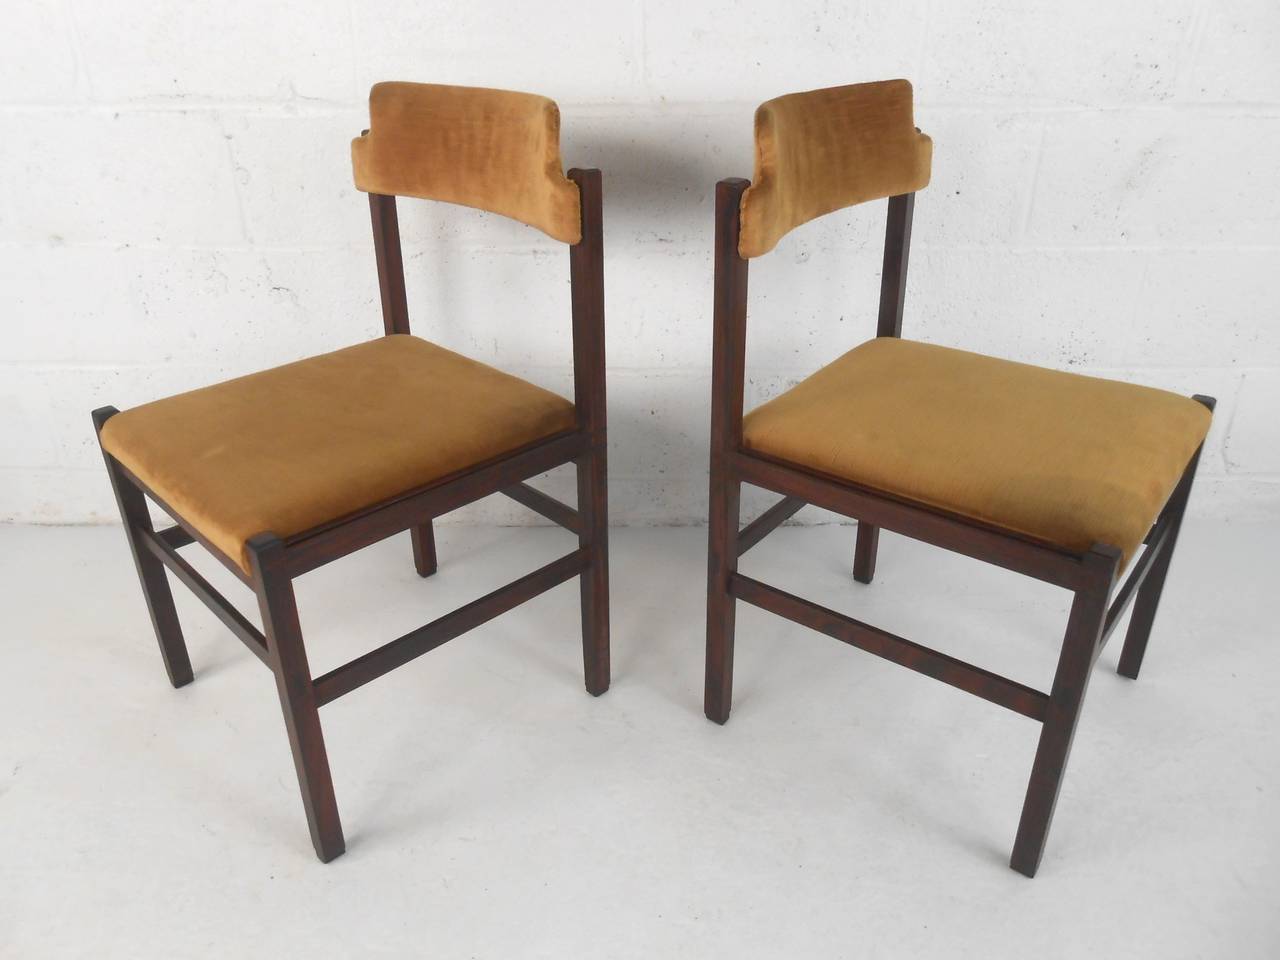 Vintage set of dining chairs from Italy with rich rosewood frames and golden velvet fabric covering. Solid square style frame. Easy to recover.

(Please confirm item location - NY or NJ - with dealer).